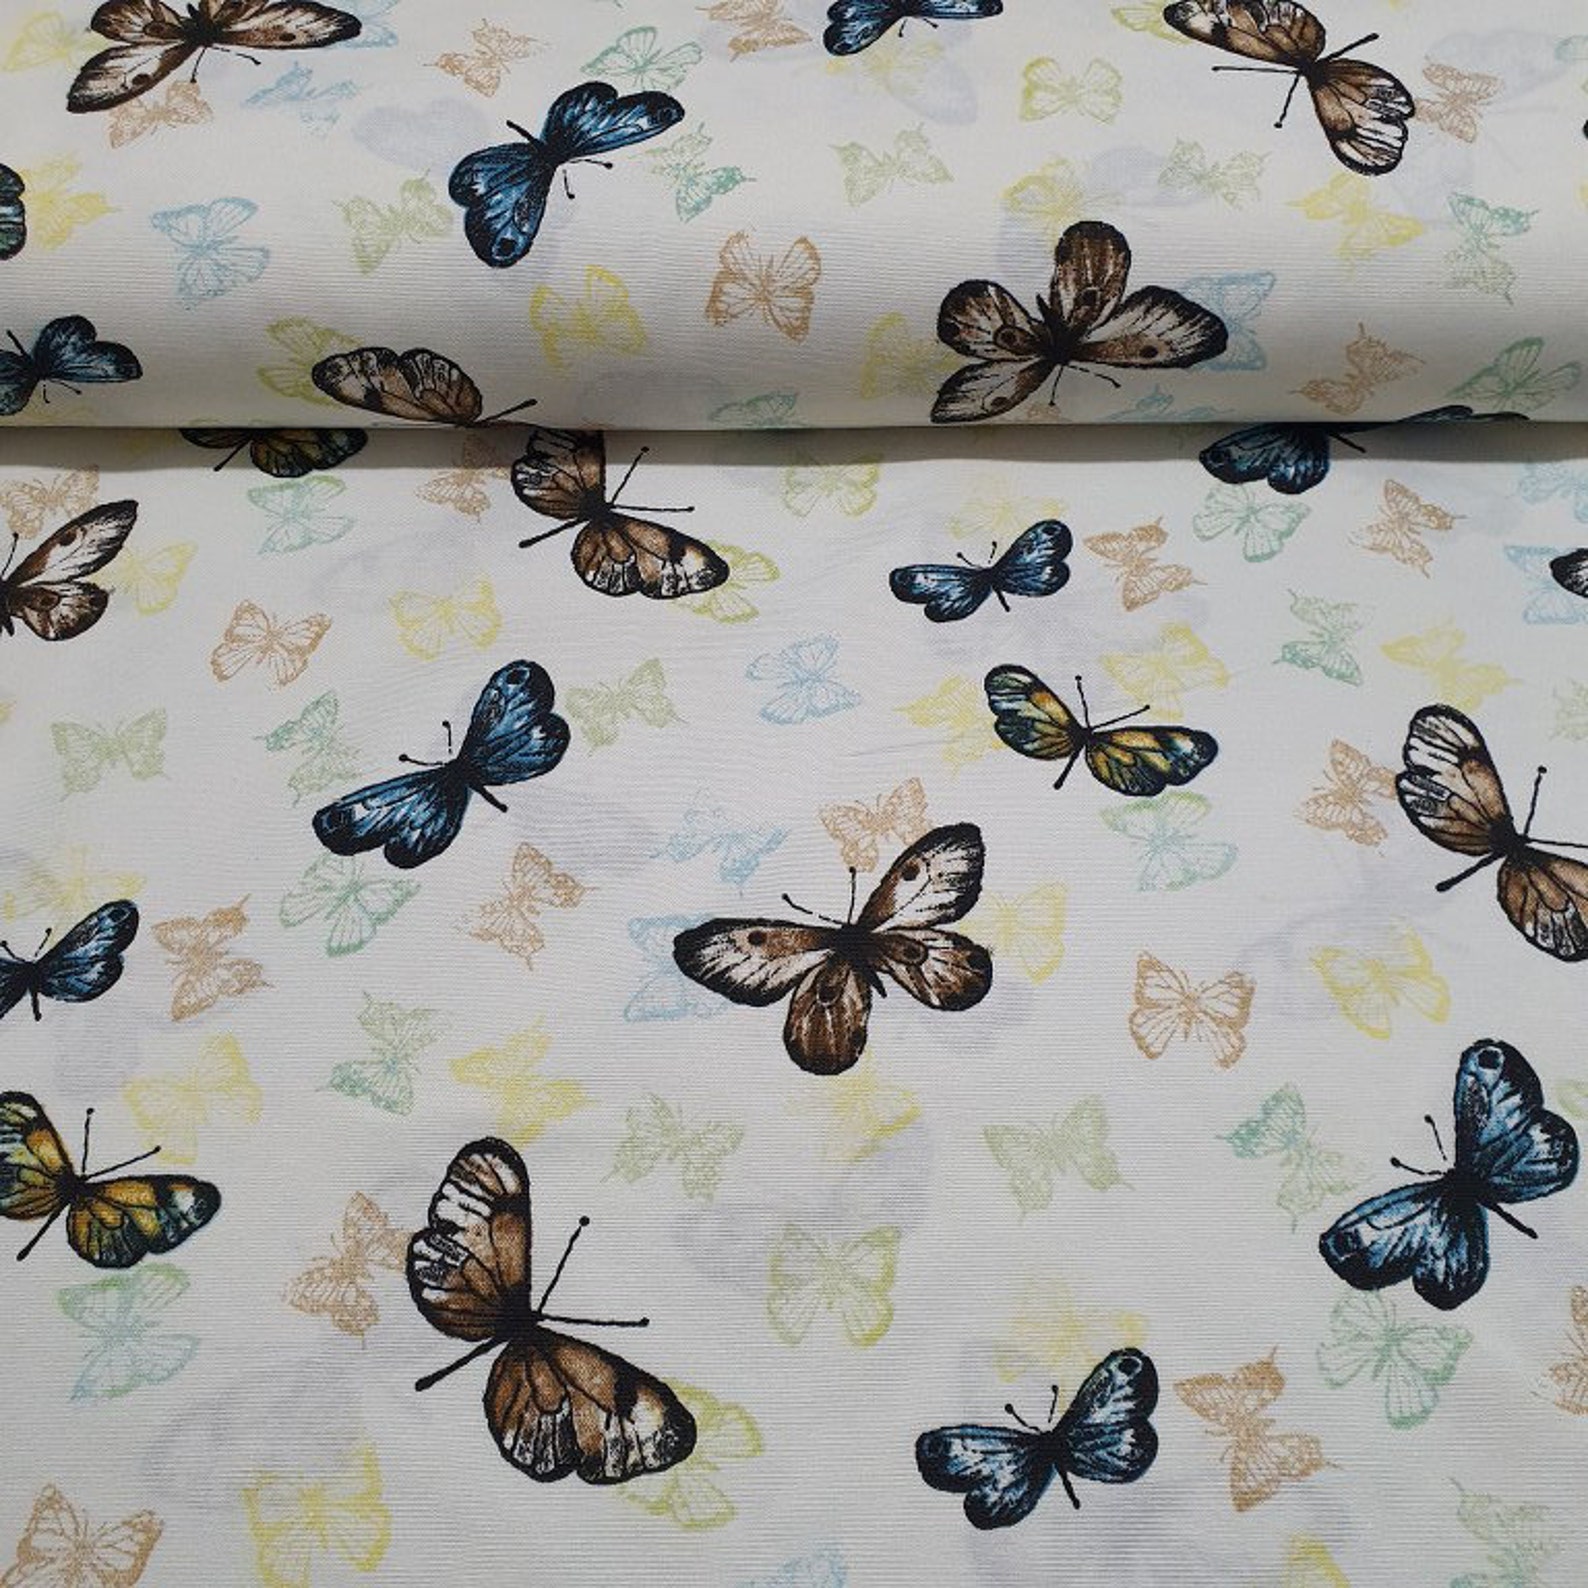 Butterfly Upholstery Fabric Drapery Fabric by Yard Curtain | Etsy